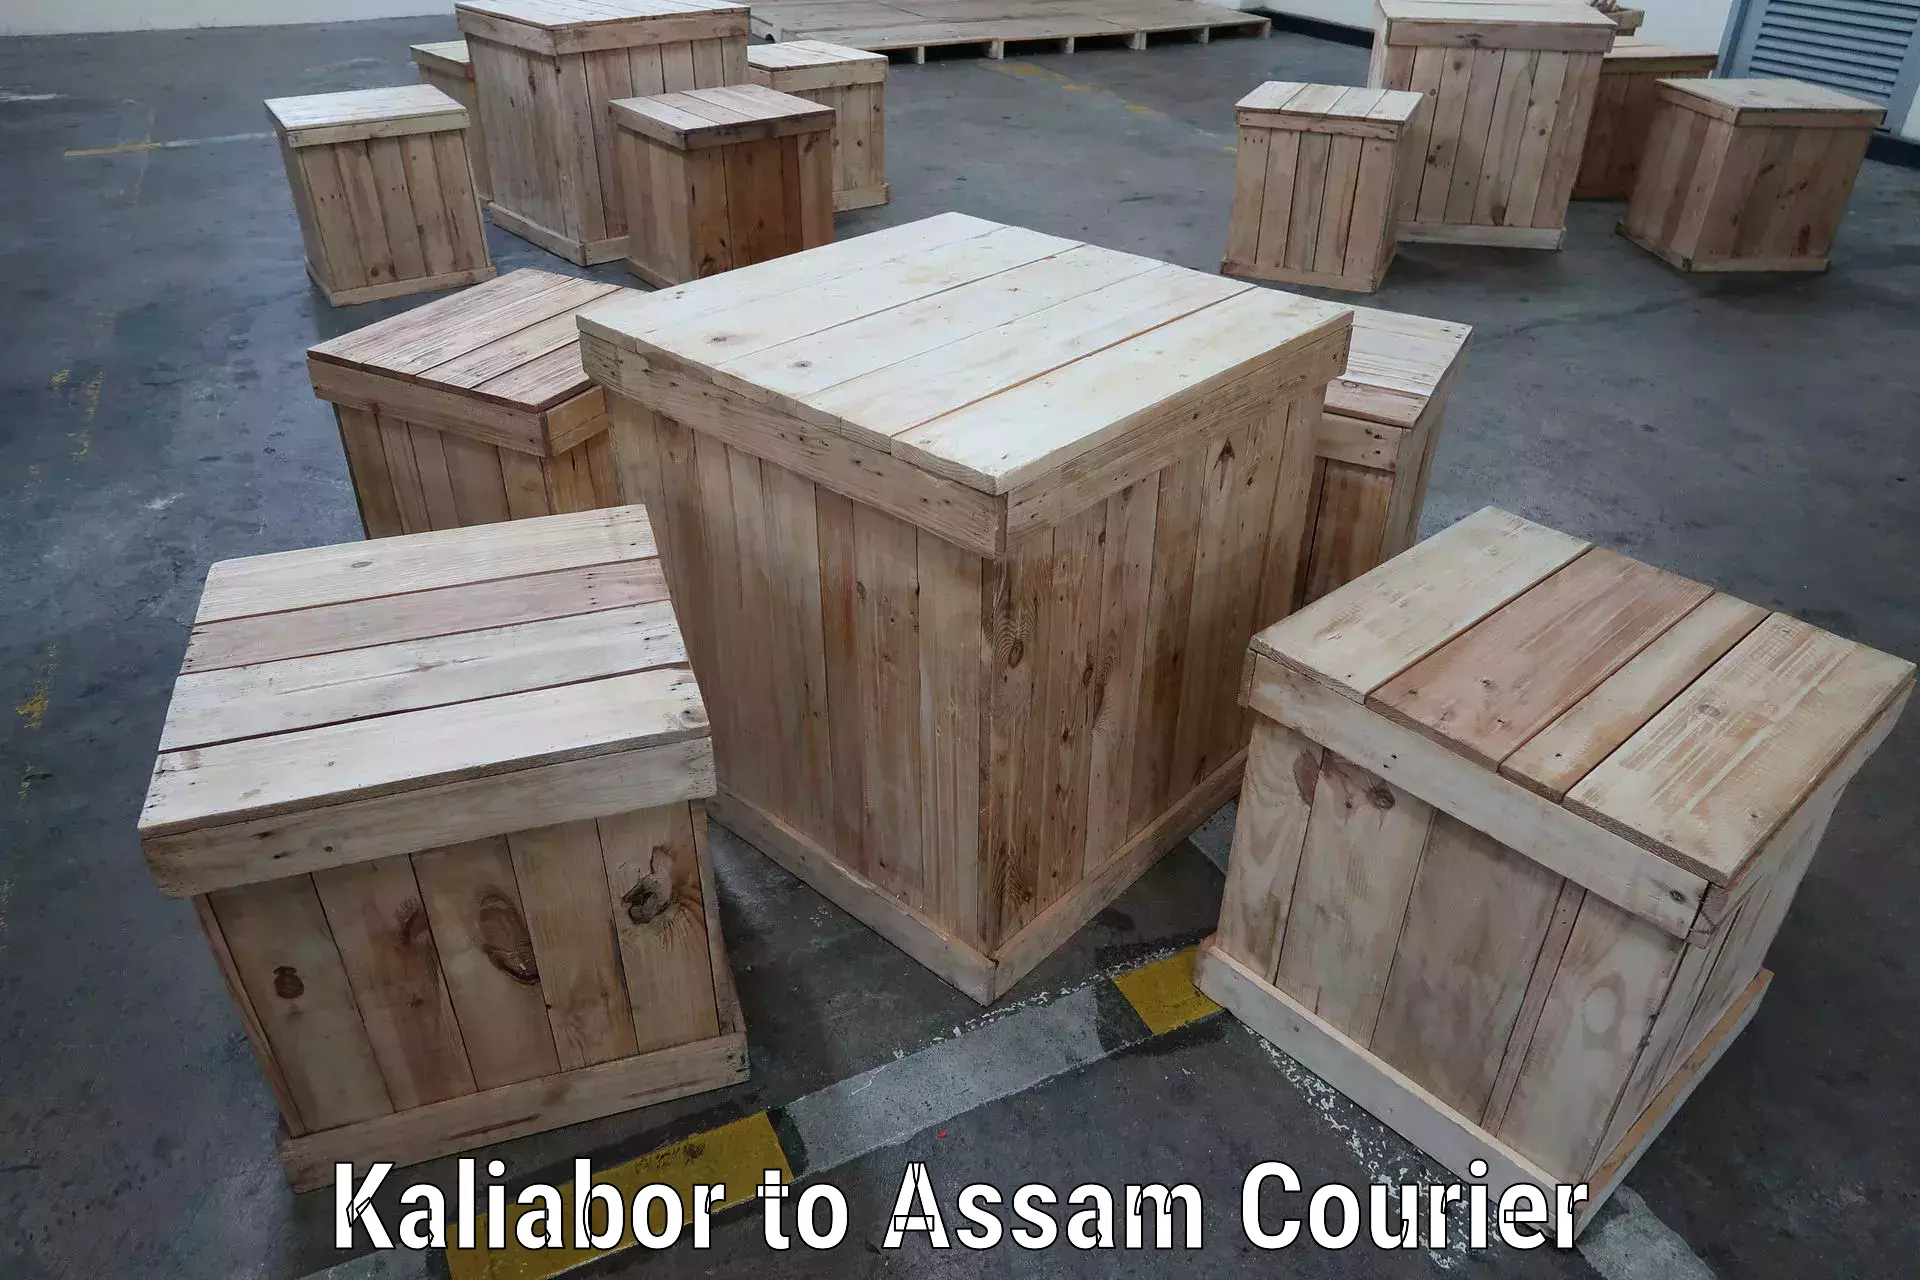 On-call courier service Kaliabor to Lala Assam